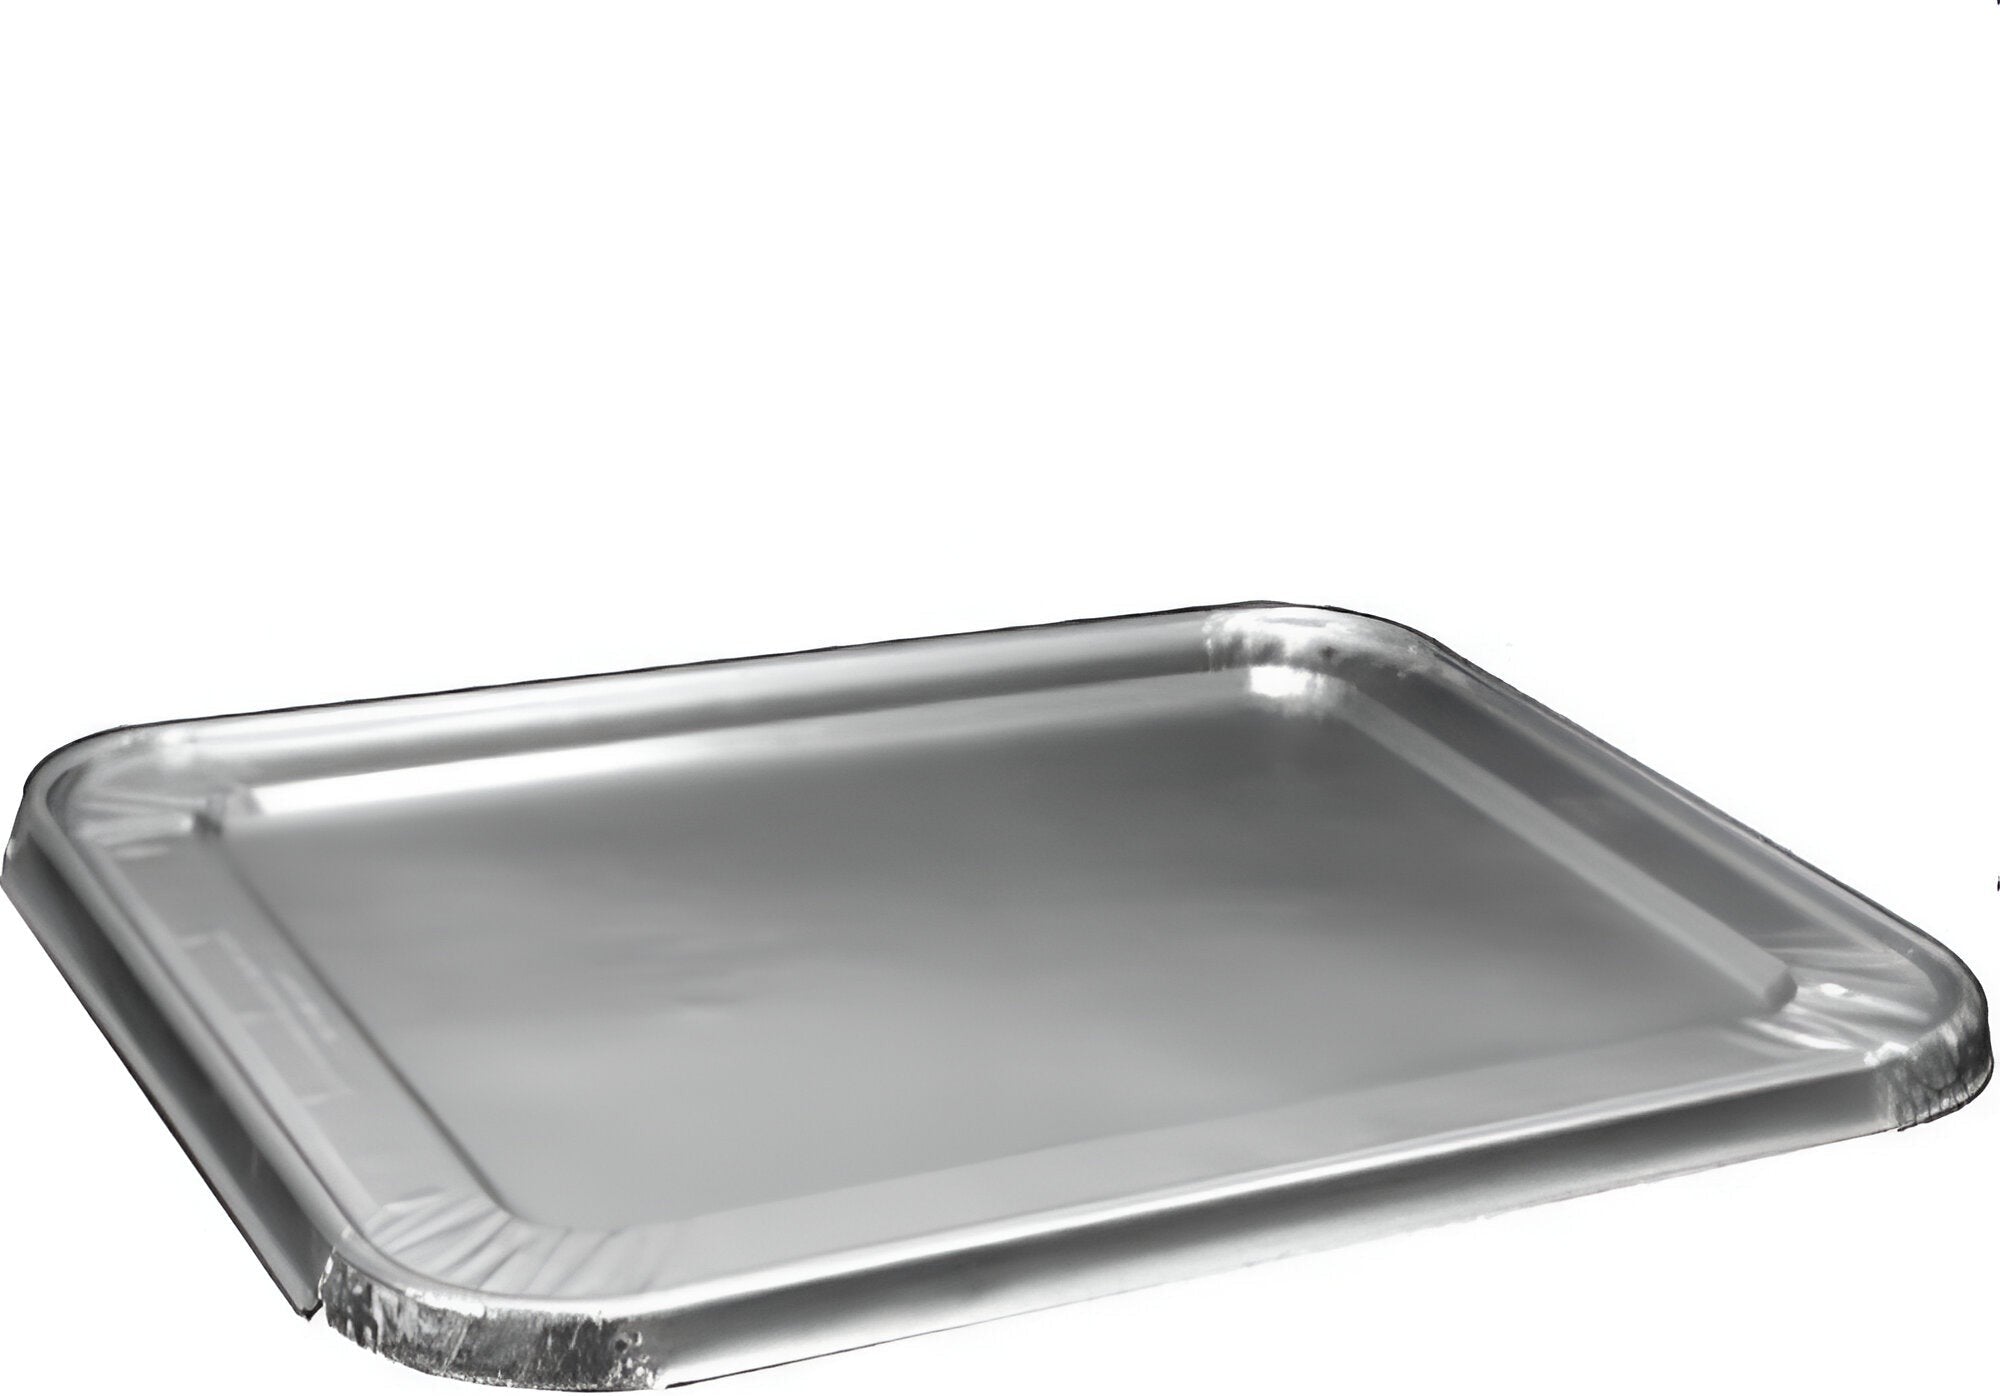 HFA - Foil Lid For Full Steam Table Foil Containers, 50/Cs - 2050-00-50